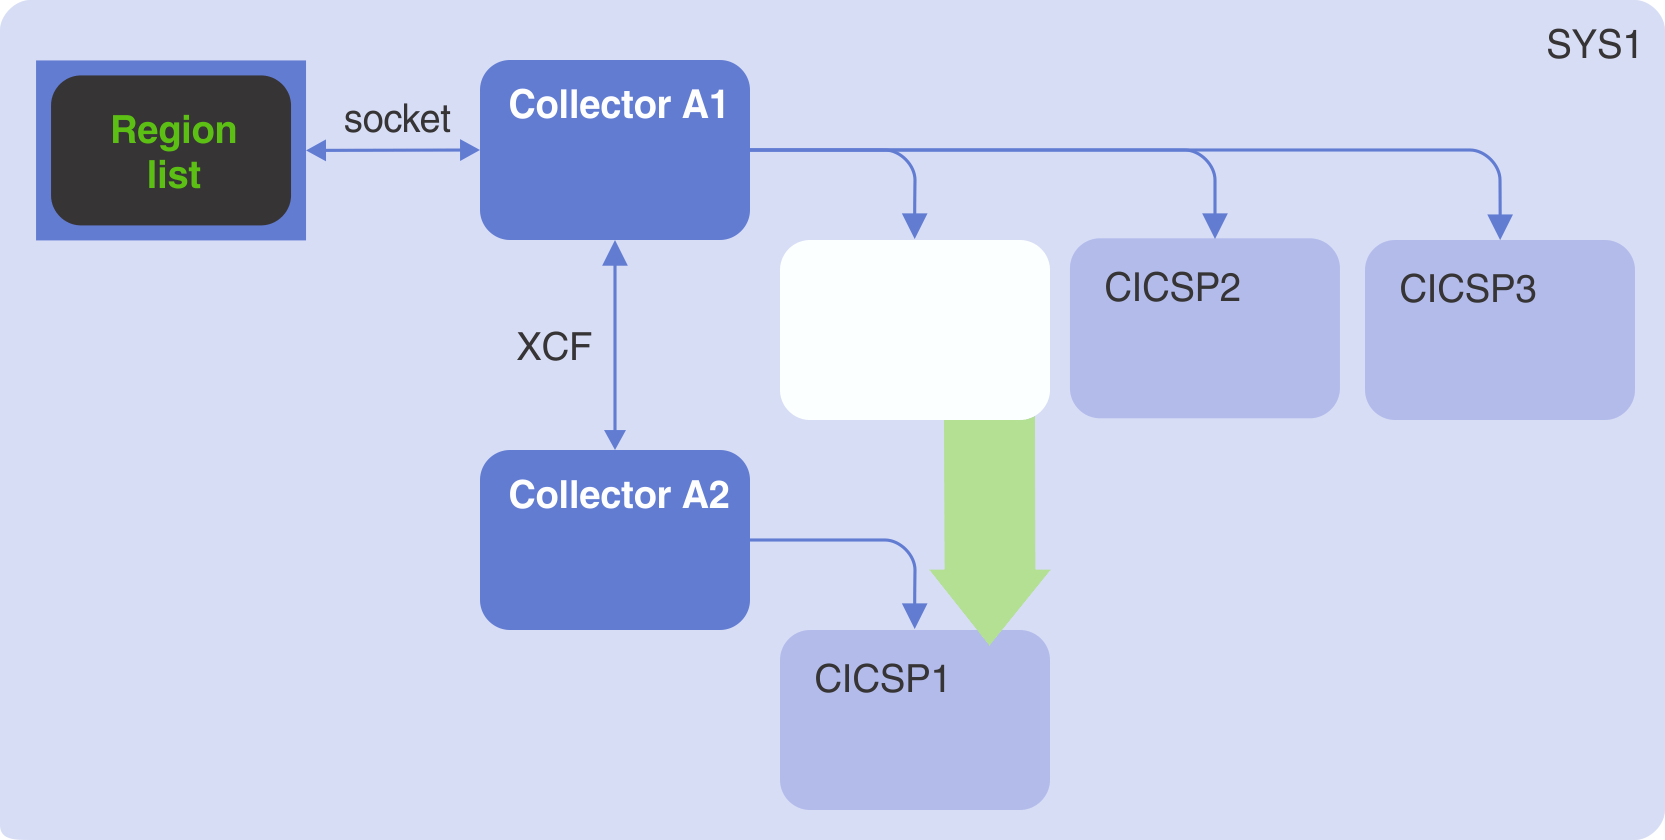 Moving CICS trace collection for a busy CICS region onto its own C\\Prof collection server